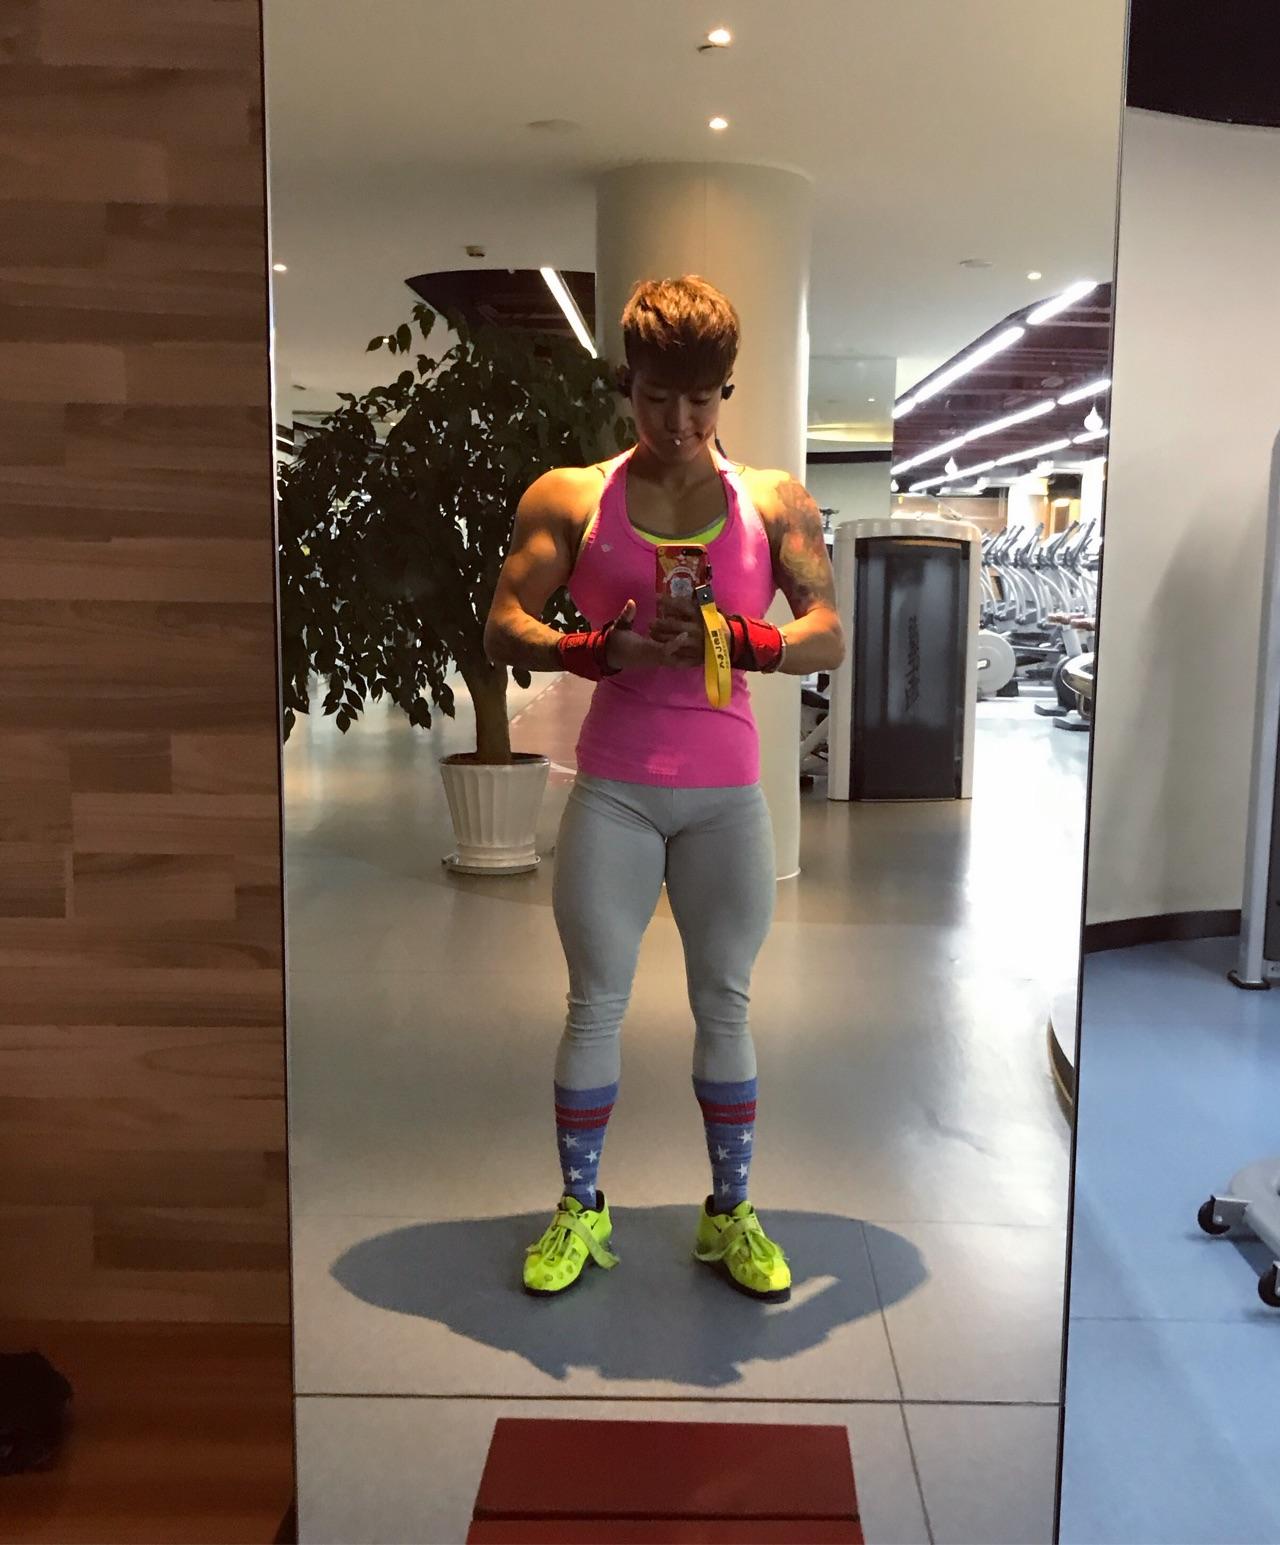 Russian Powerlifter Julia Vins Is Beautiful And Strong | HubPages